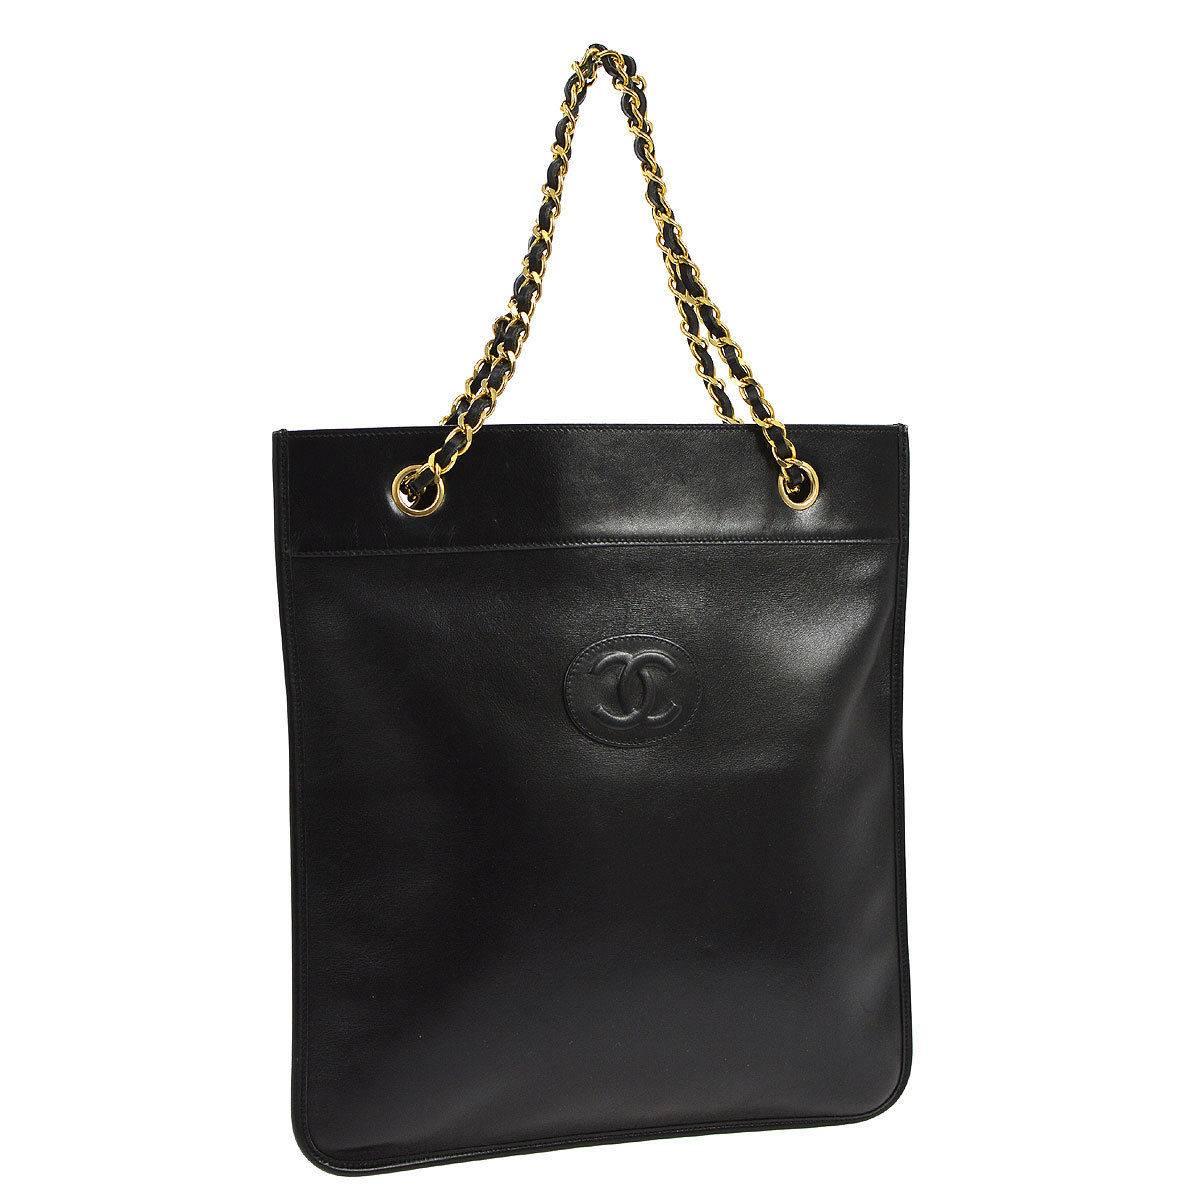 Chanel Black Leather CC Charm Gold Dual Chain Carryall Shoulder Tote Bag